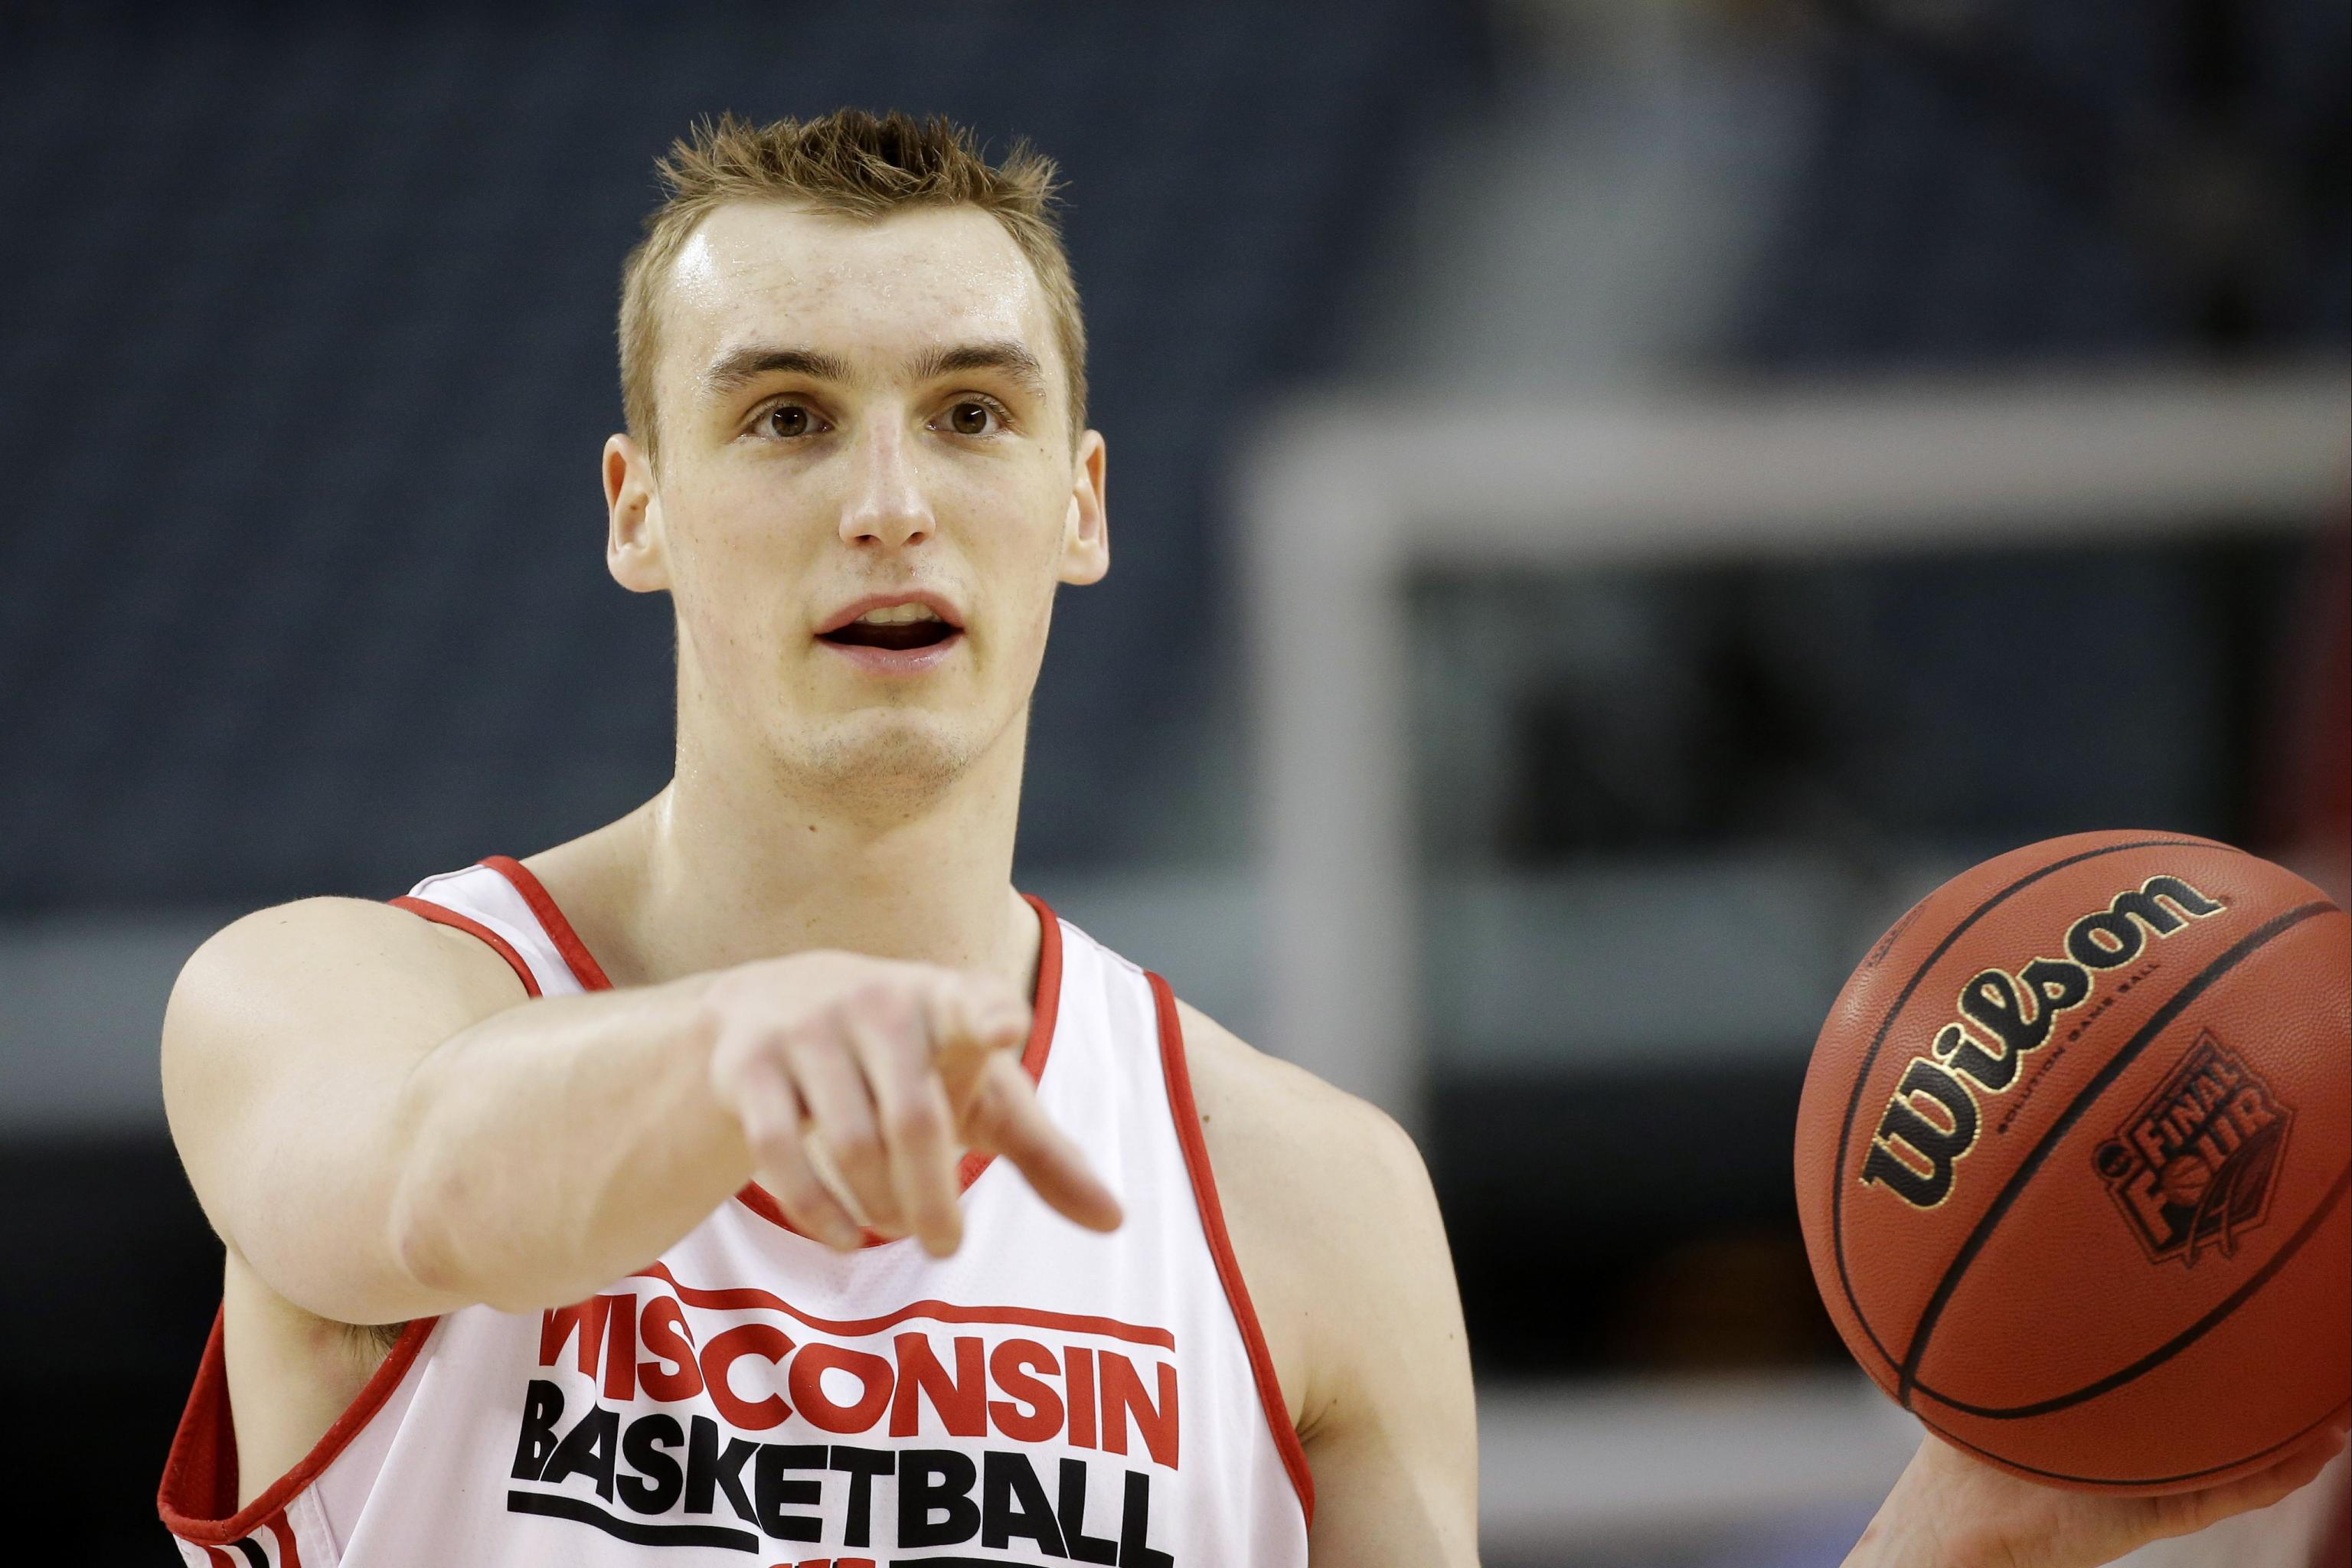 Wisconsin college basketball: Fantasy team could be top 25 squad